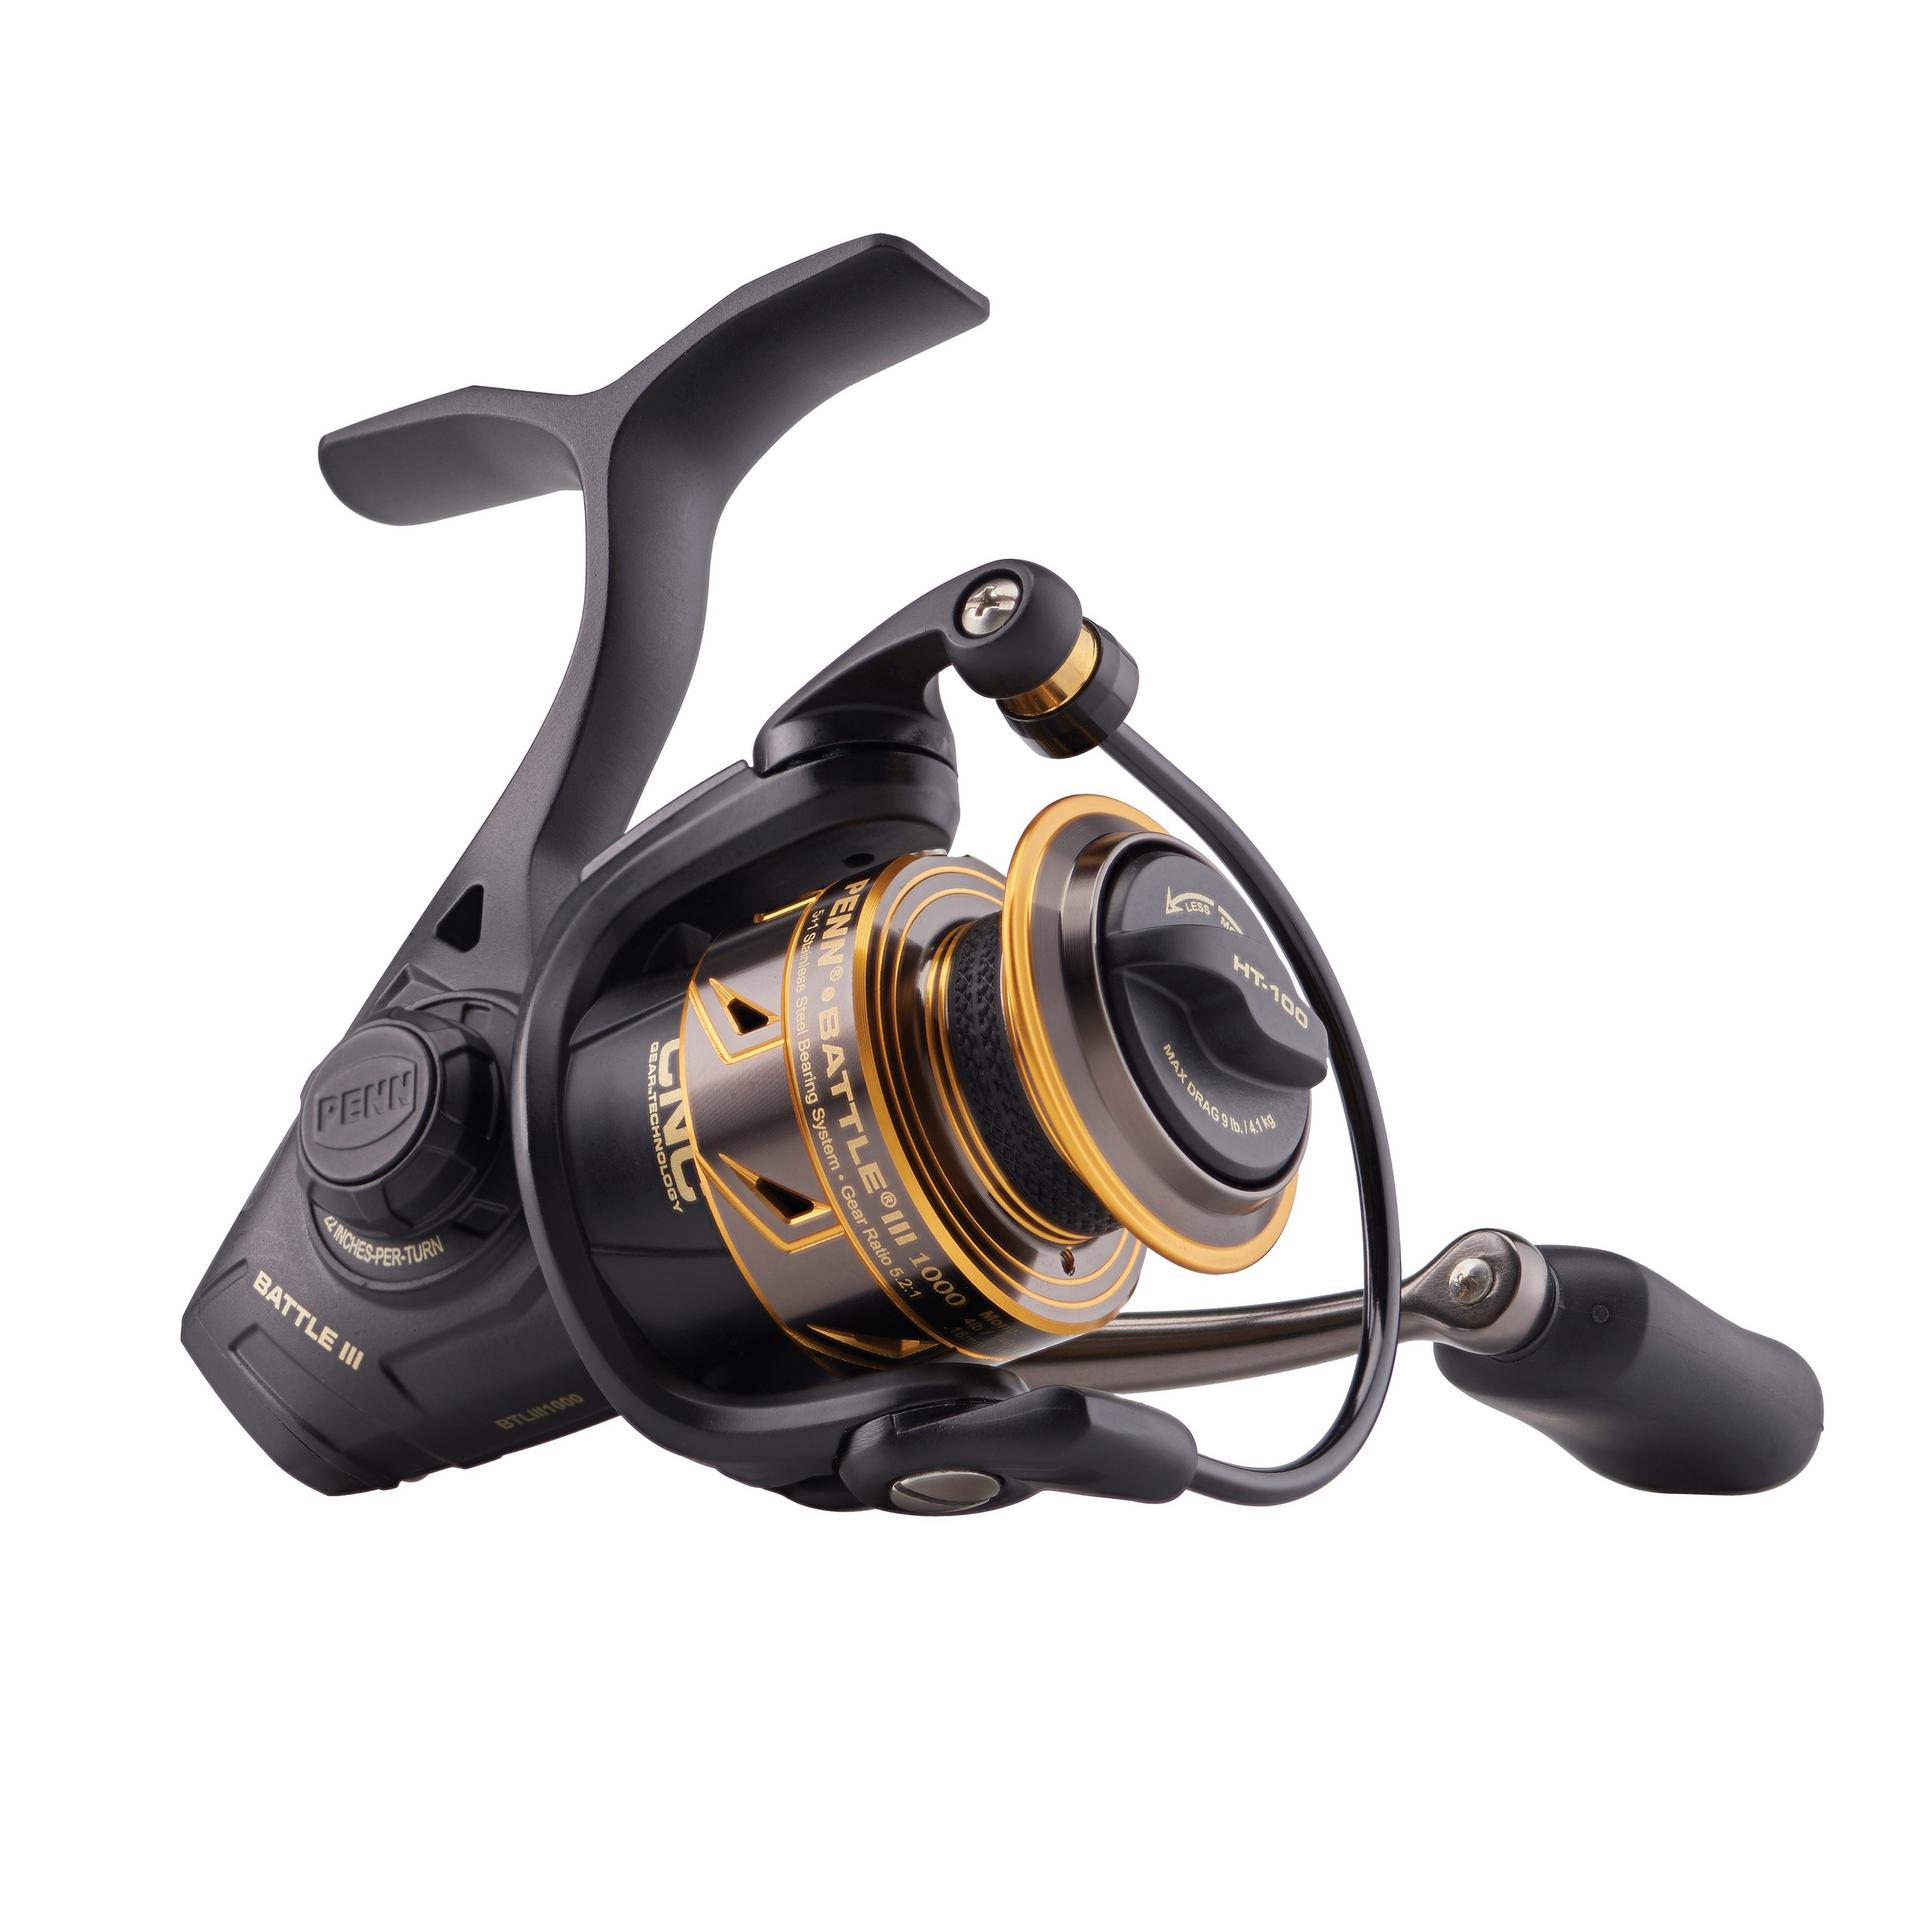  8 Bearing Fishing Spinning Reel Red Color 5.2:1 Gear